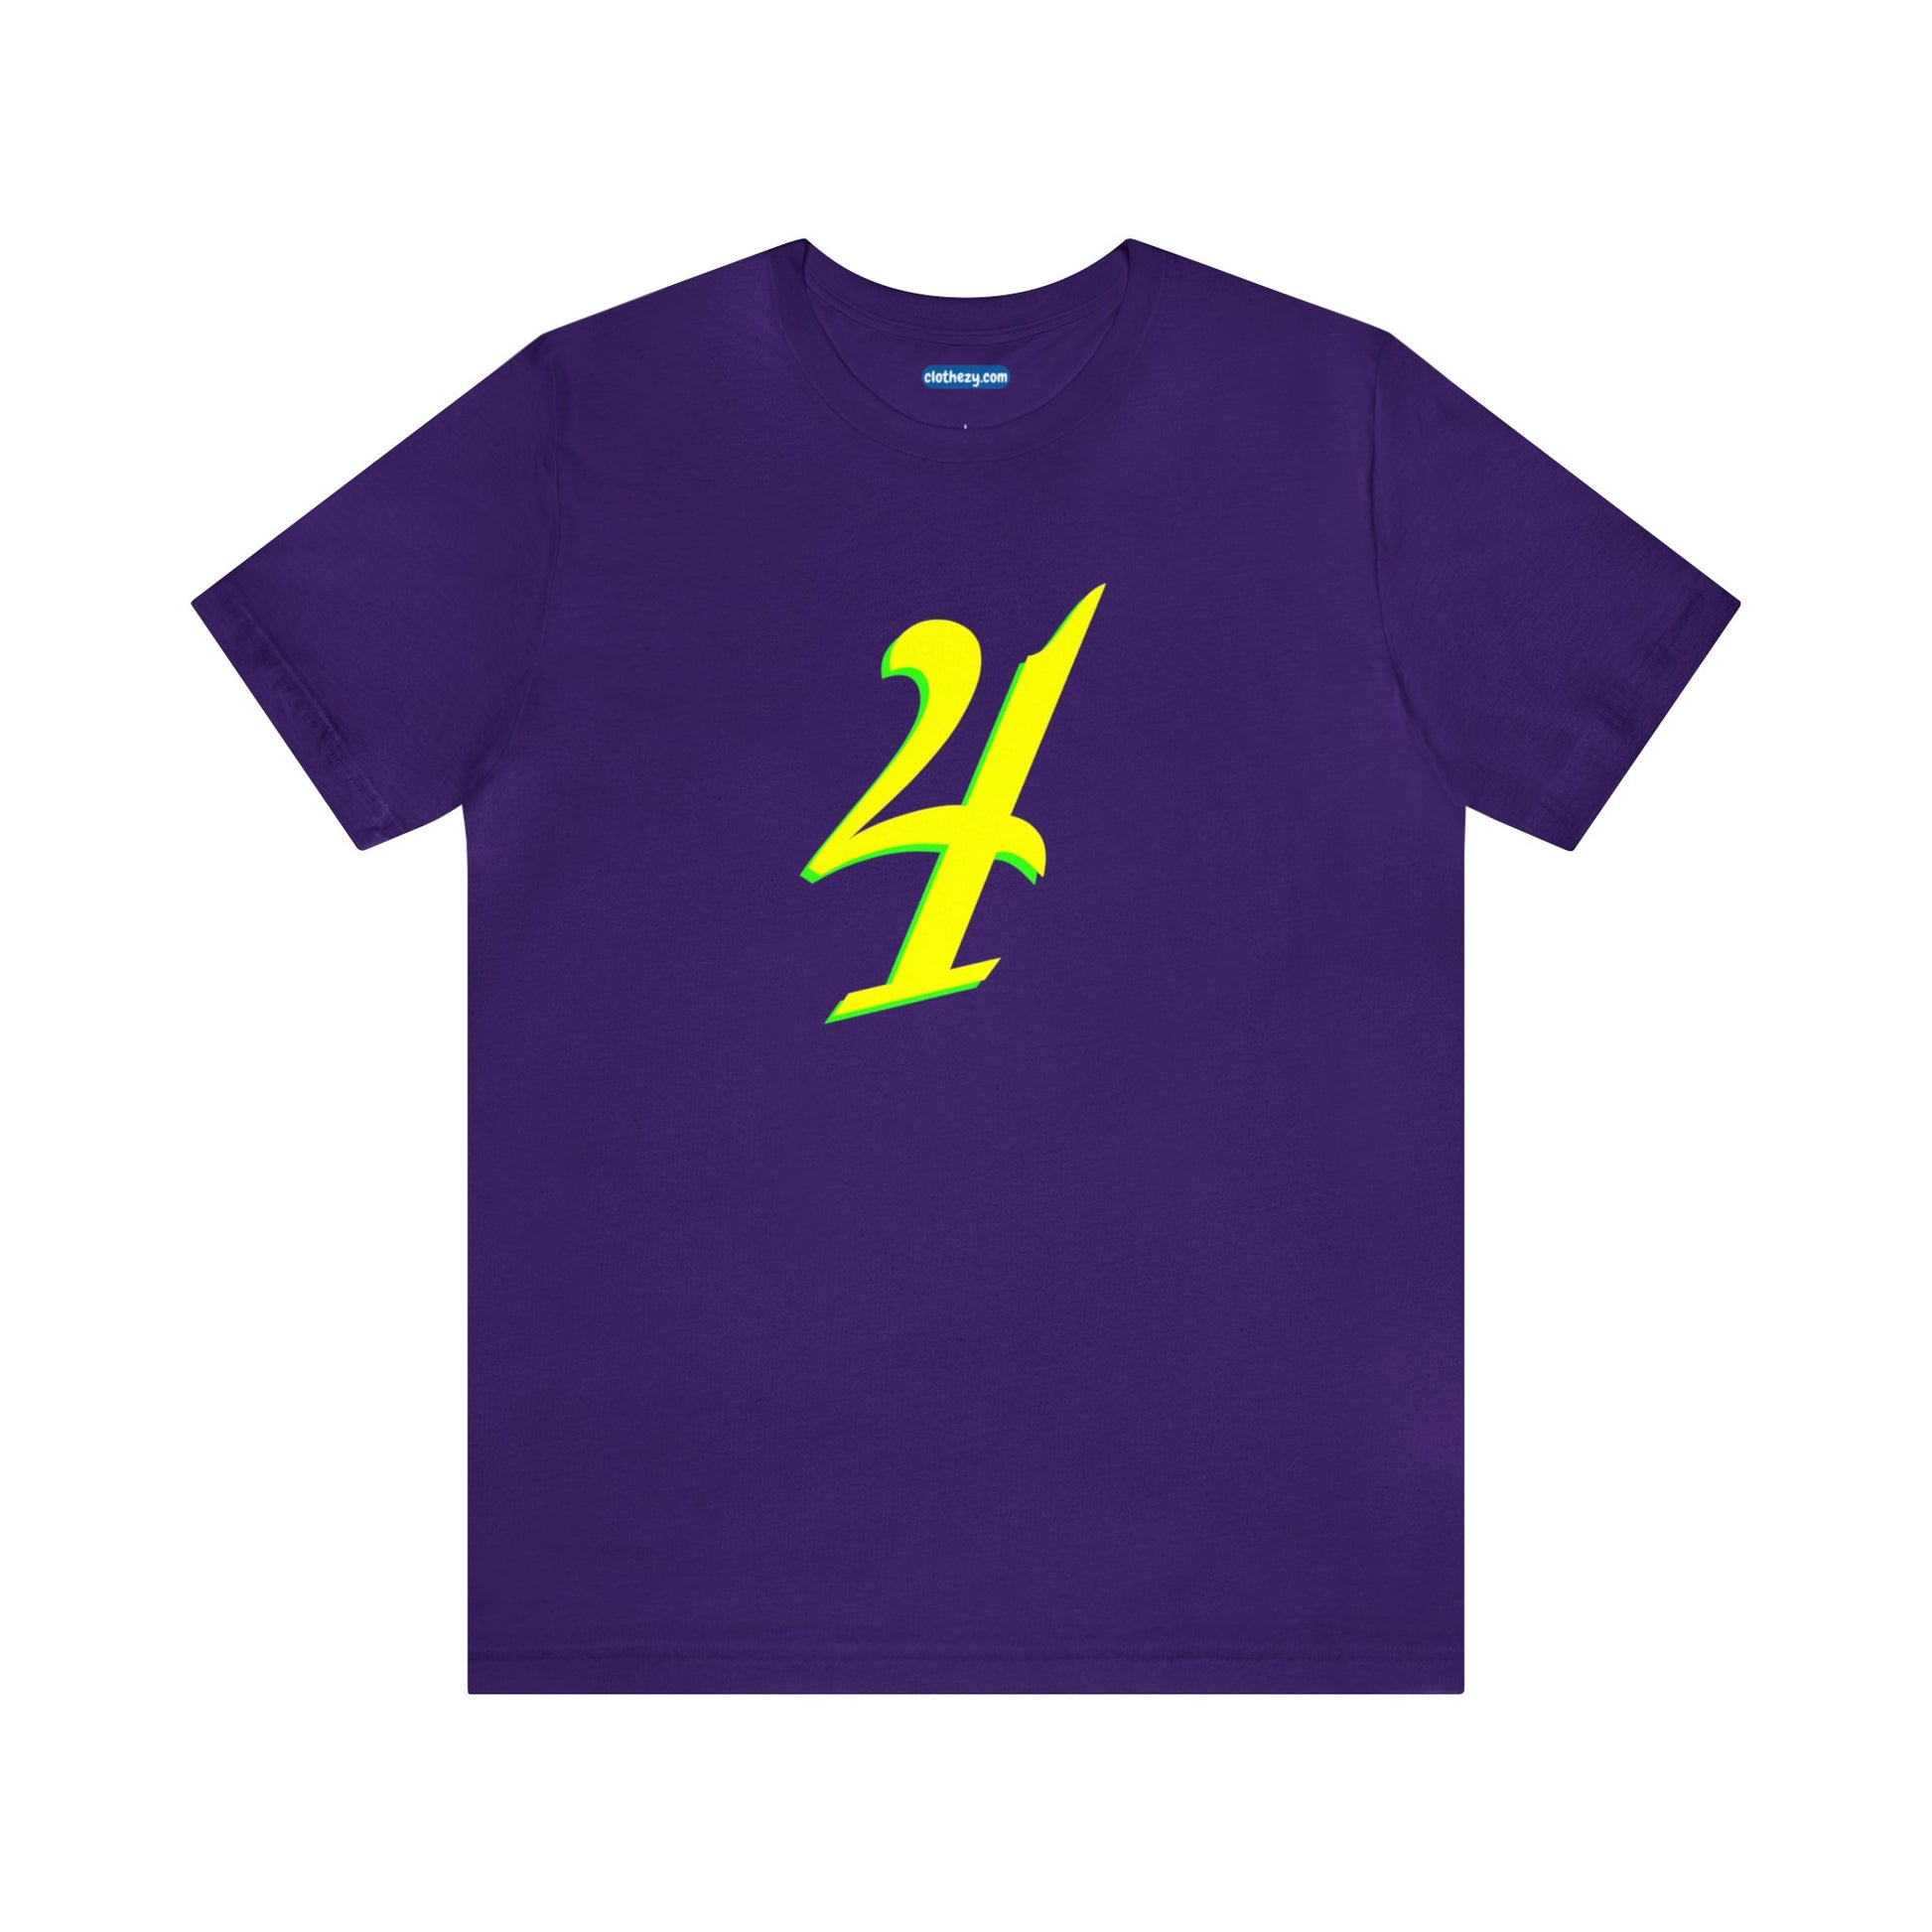 Number 4 Design - Soft Cotton Tee for birthdays and celebrations, Gift for friends and family, Multiple Options by clothezy.com in Purple Size Small - Buy Now